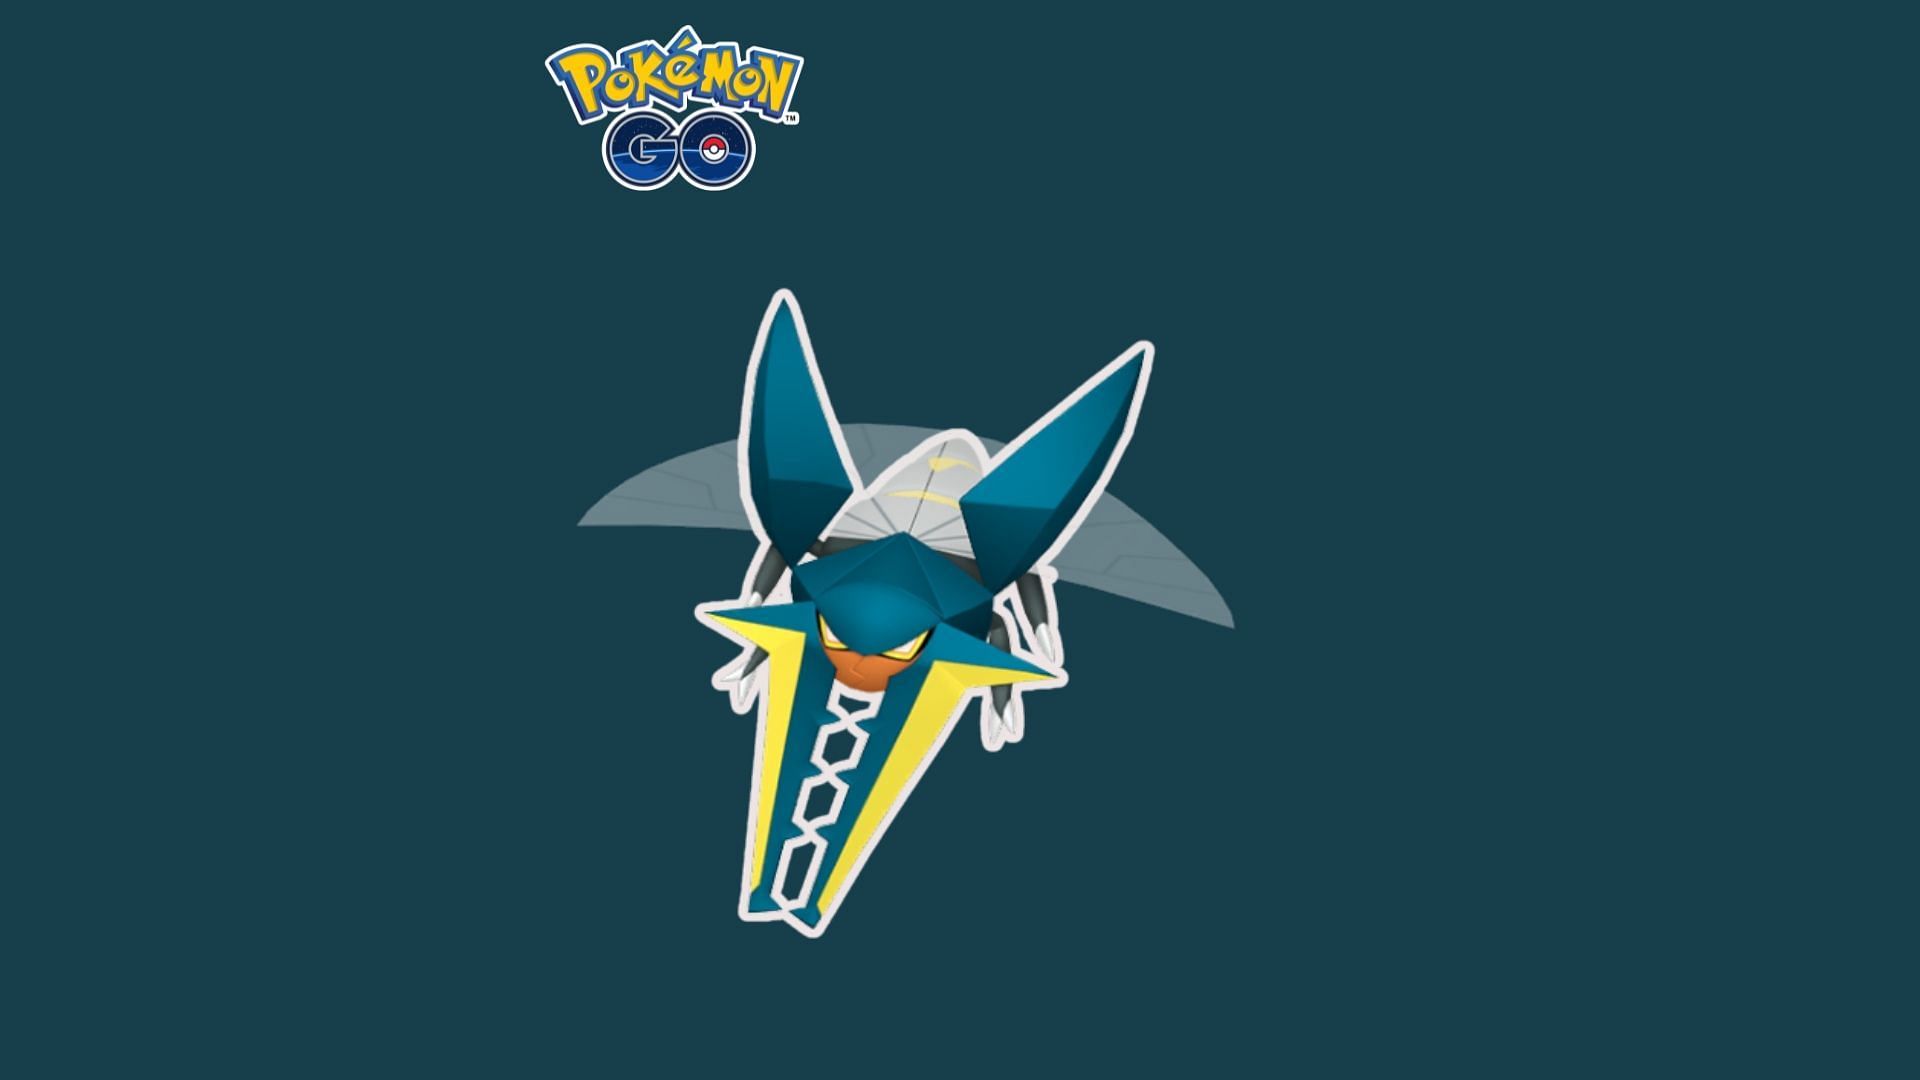 Finish quests to receive awards with Vikavolt encounters. (Image via TPC)